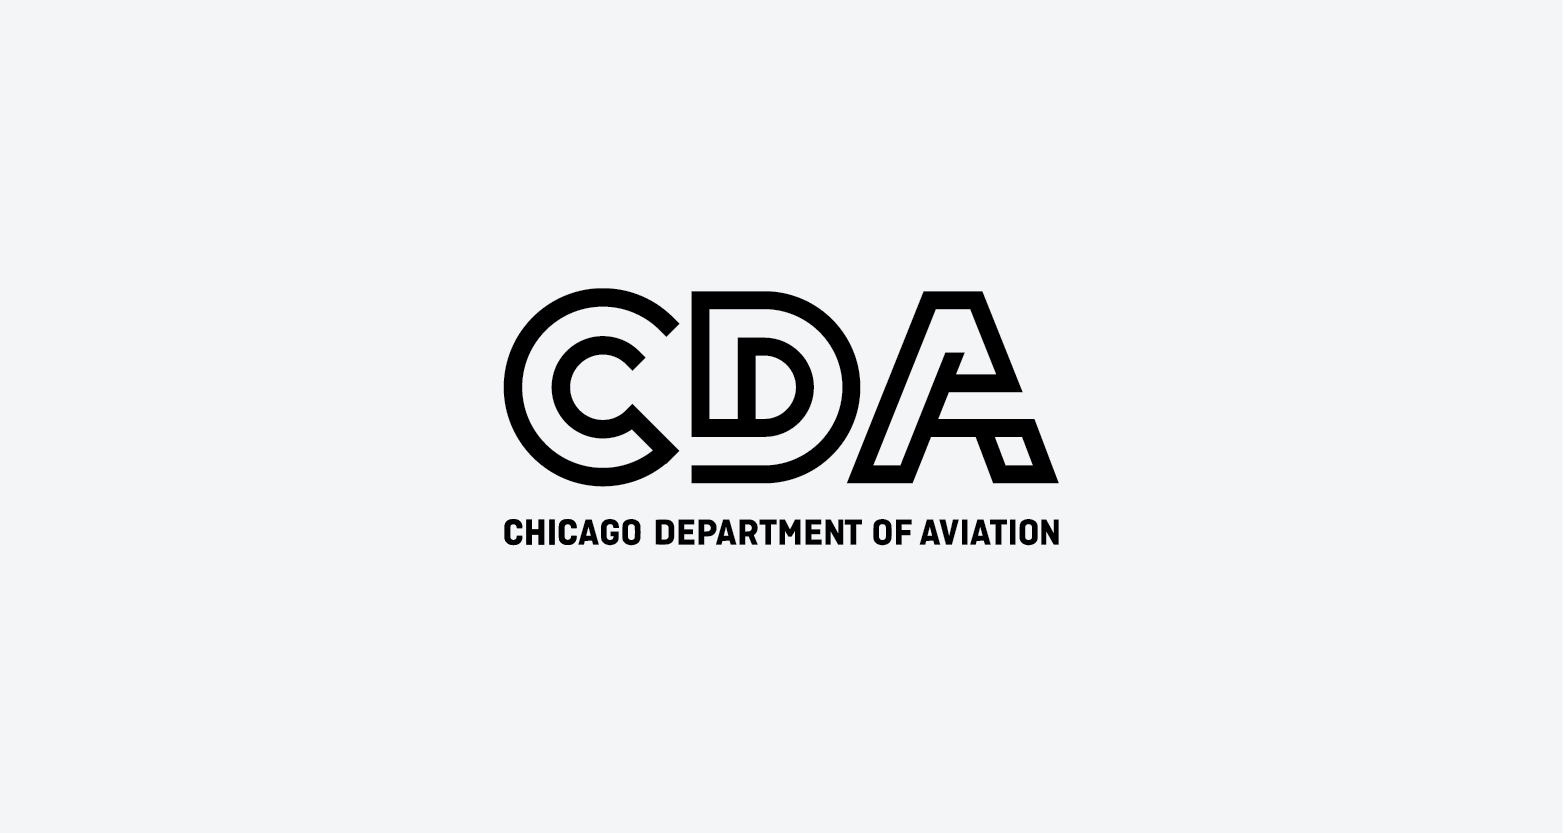 Chicago Department of Aviation – City Department